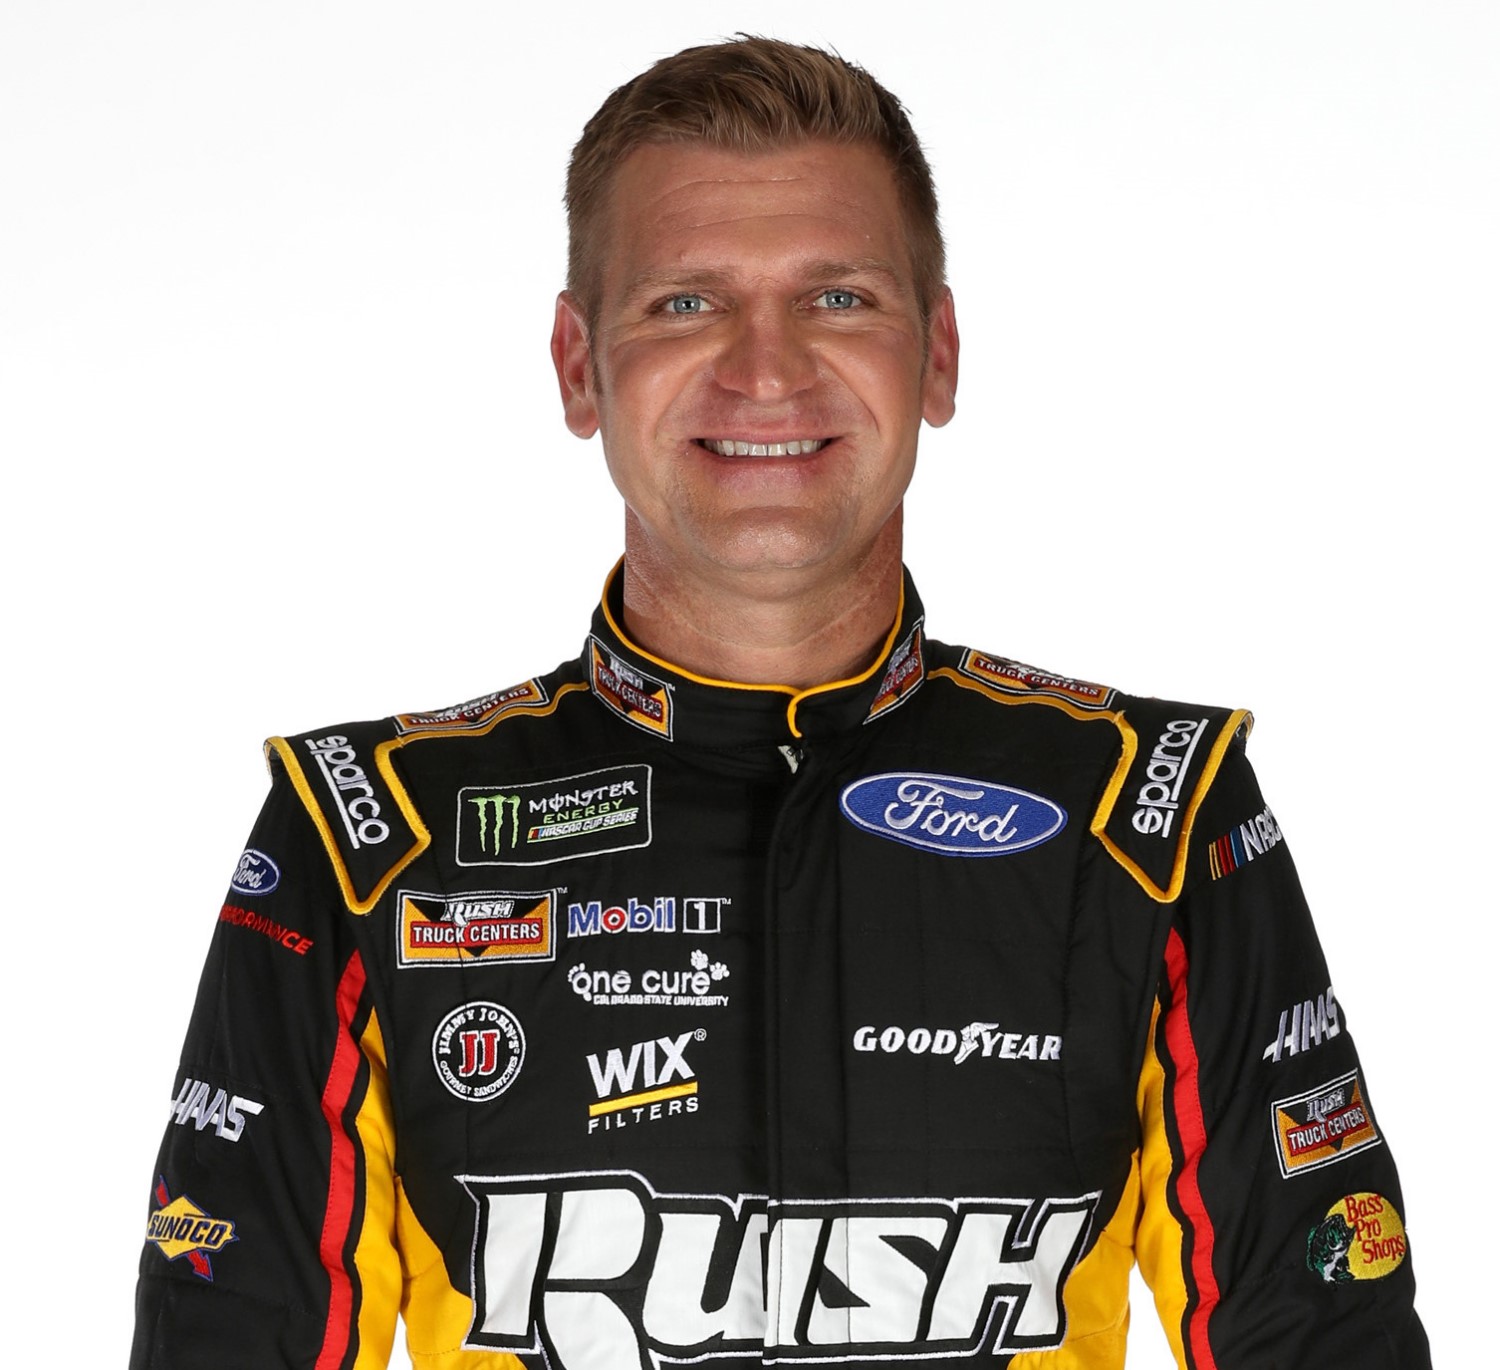 Clint Bowyer cheated to get 2nd in Dover